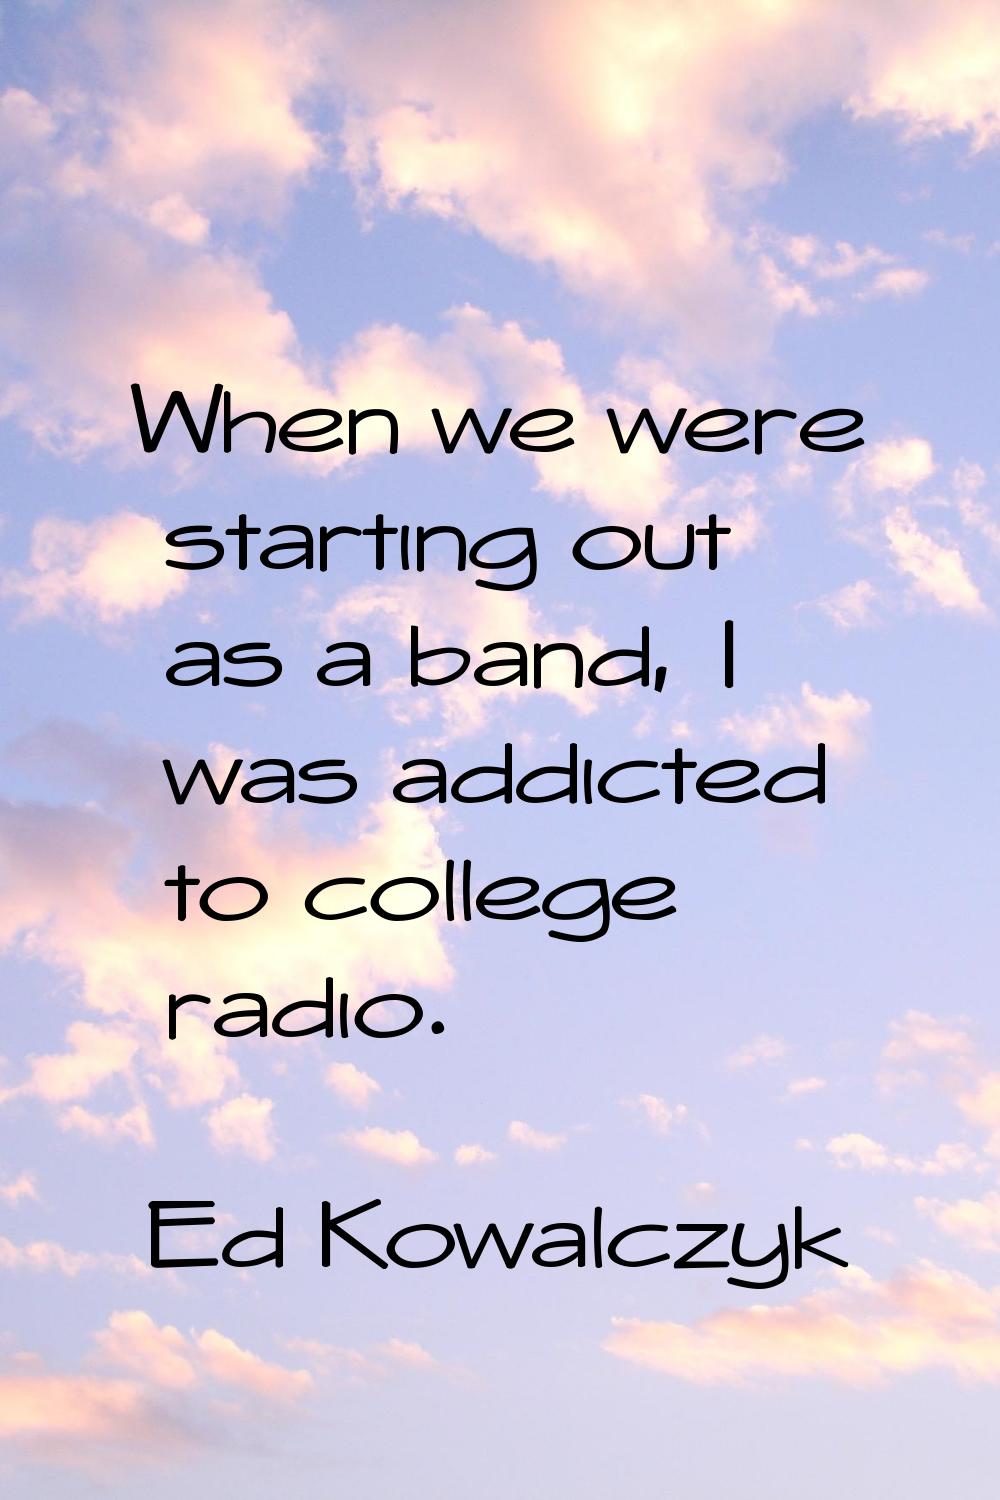 When we were starting out as a band, I was addicted to college radio.